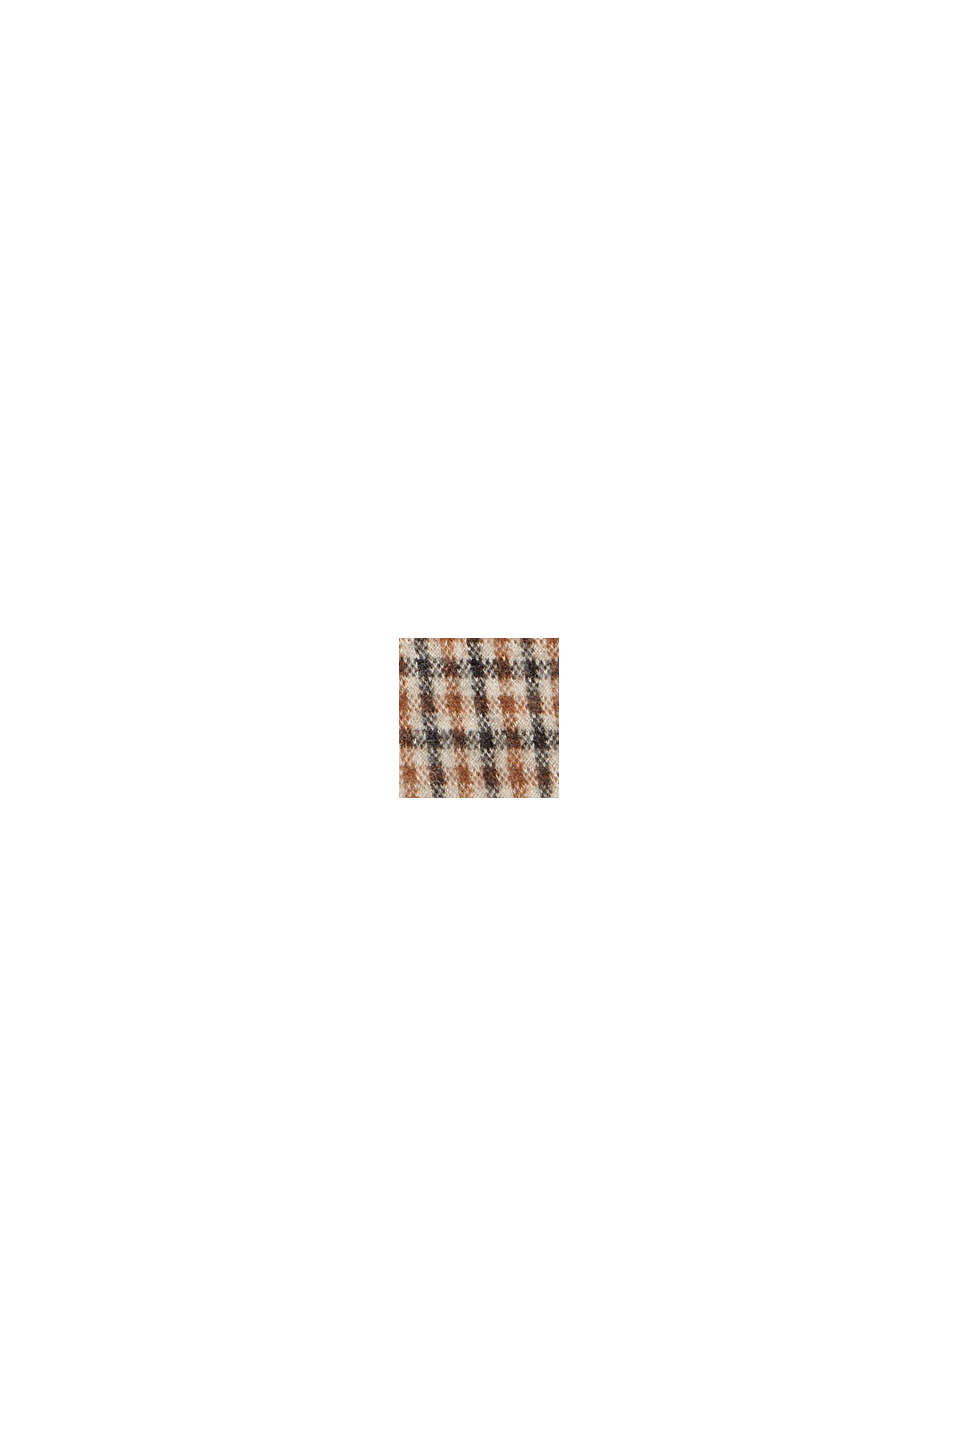 Checked stirrup leggings with a flannel texture, BEIGE, swatch